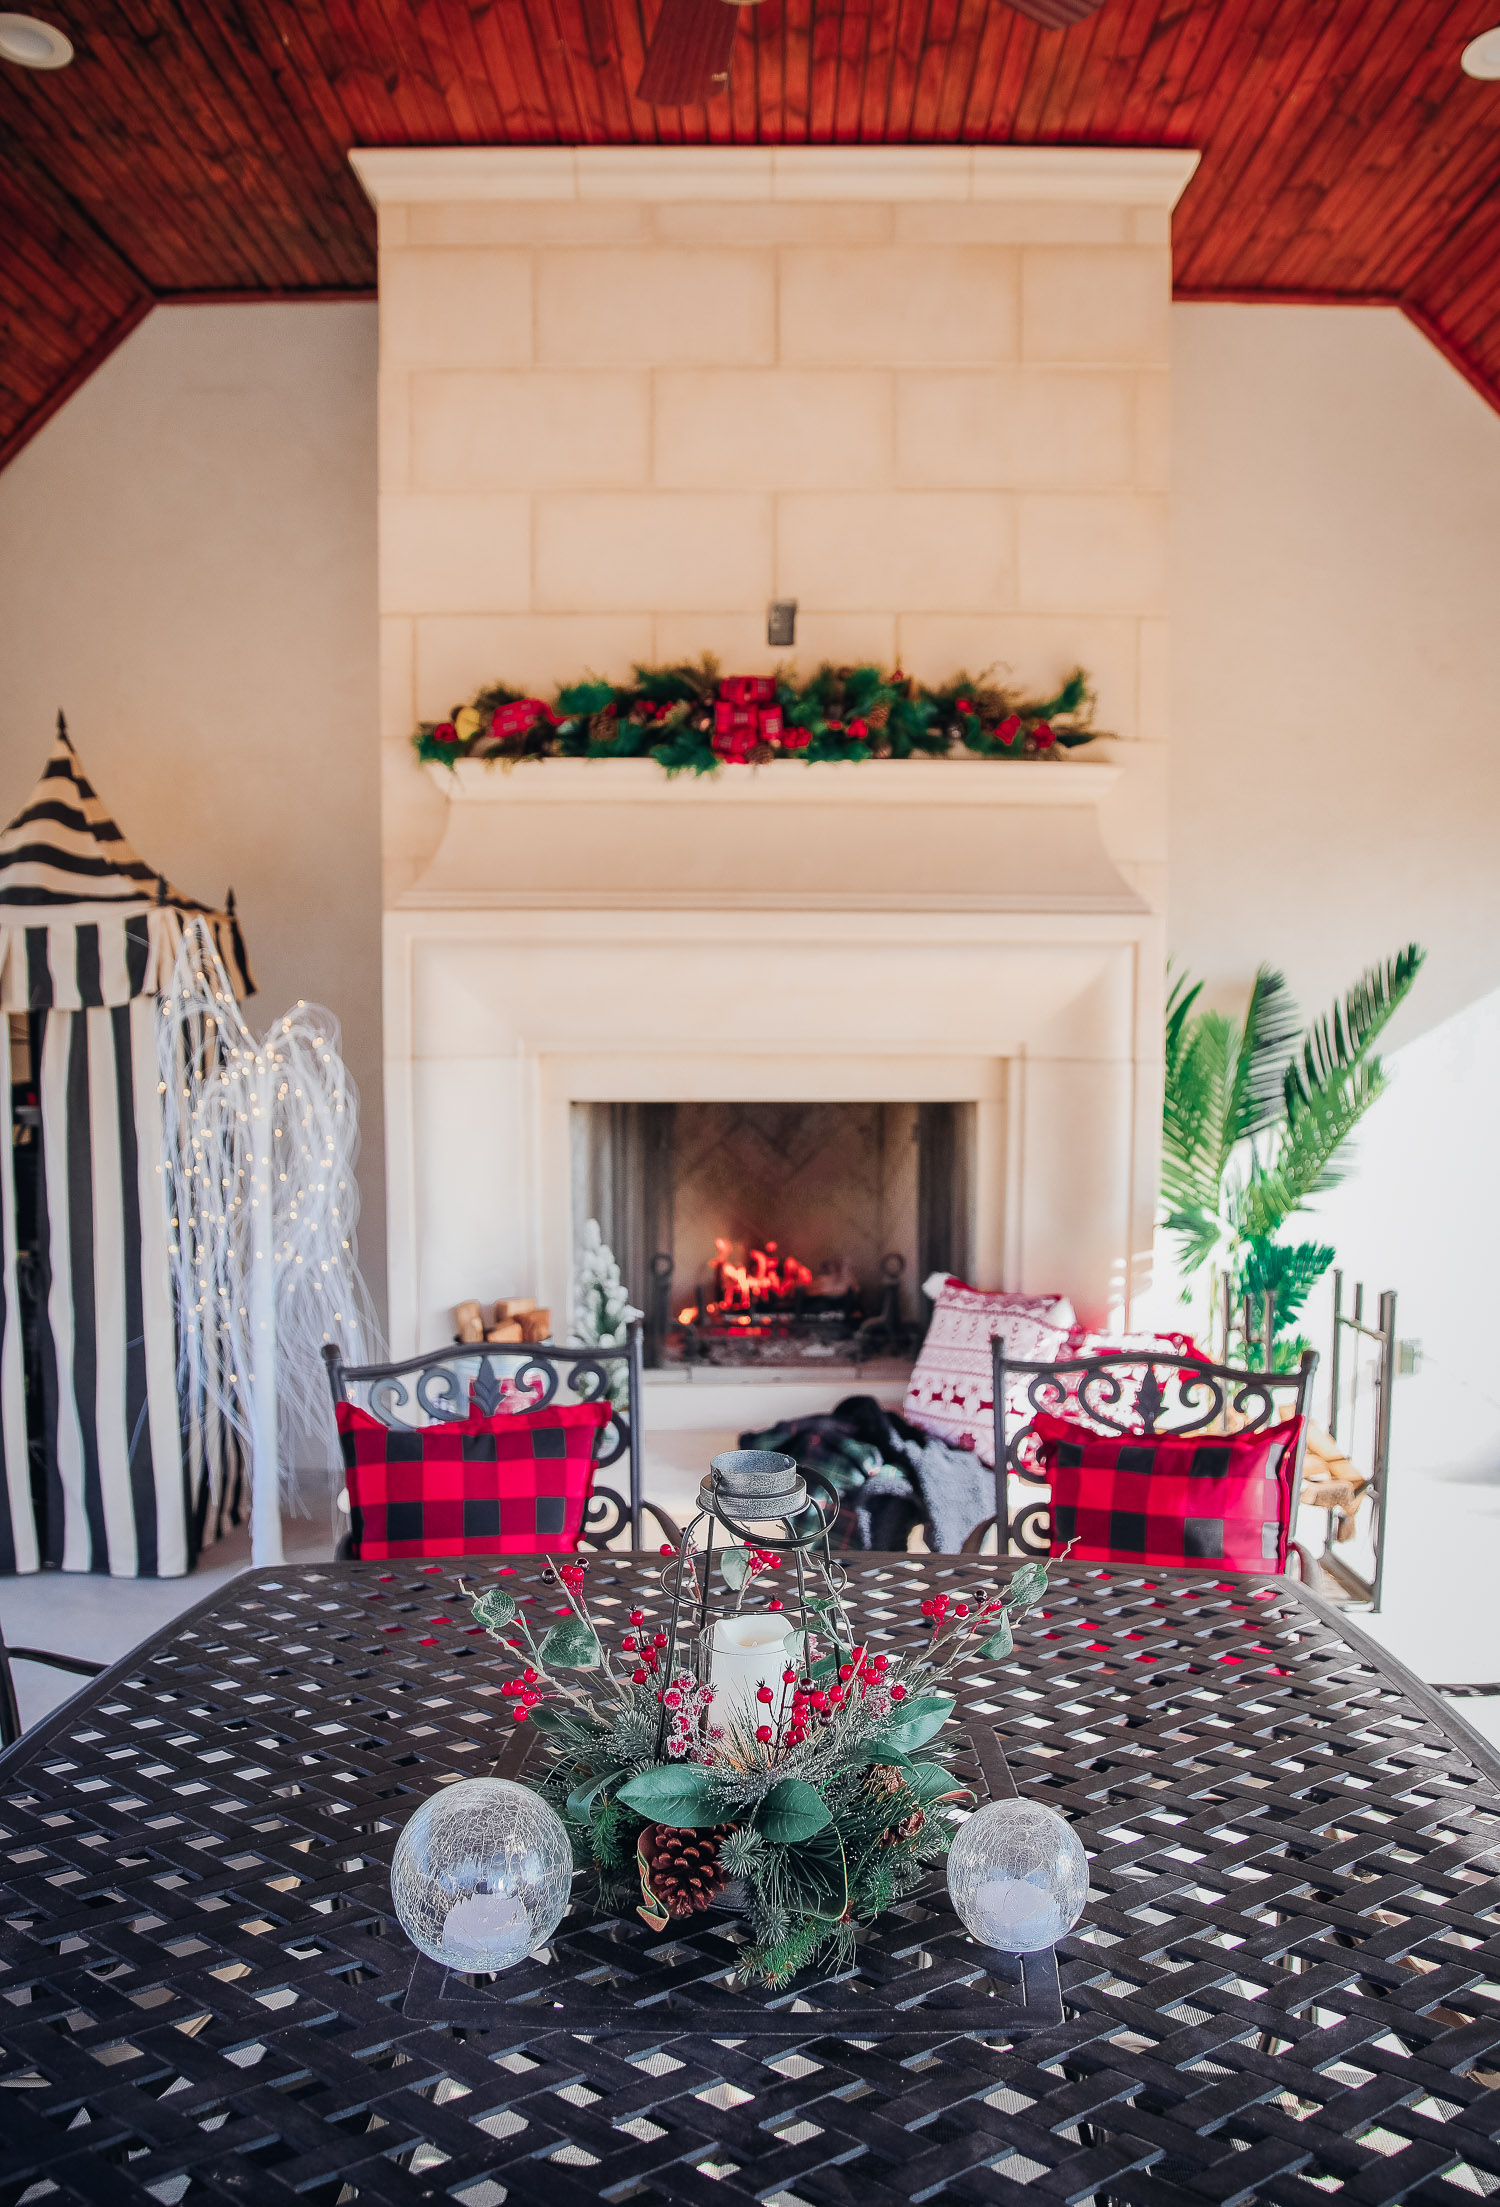 backyard decor christmas, outdoor pool christmas decor, walmart pool ornament, emily gemma backyard | Christmas Pool Decorations by popular US life and style blog, The Sweetest Thing: image of a pool house decorated with Christmas garland, black and red buffalo check throw pillows, Christmas tree decor, and candles. 